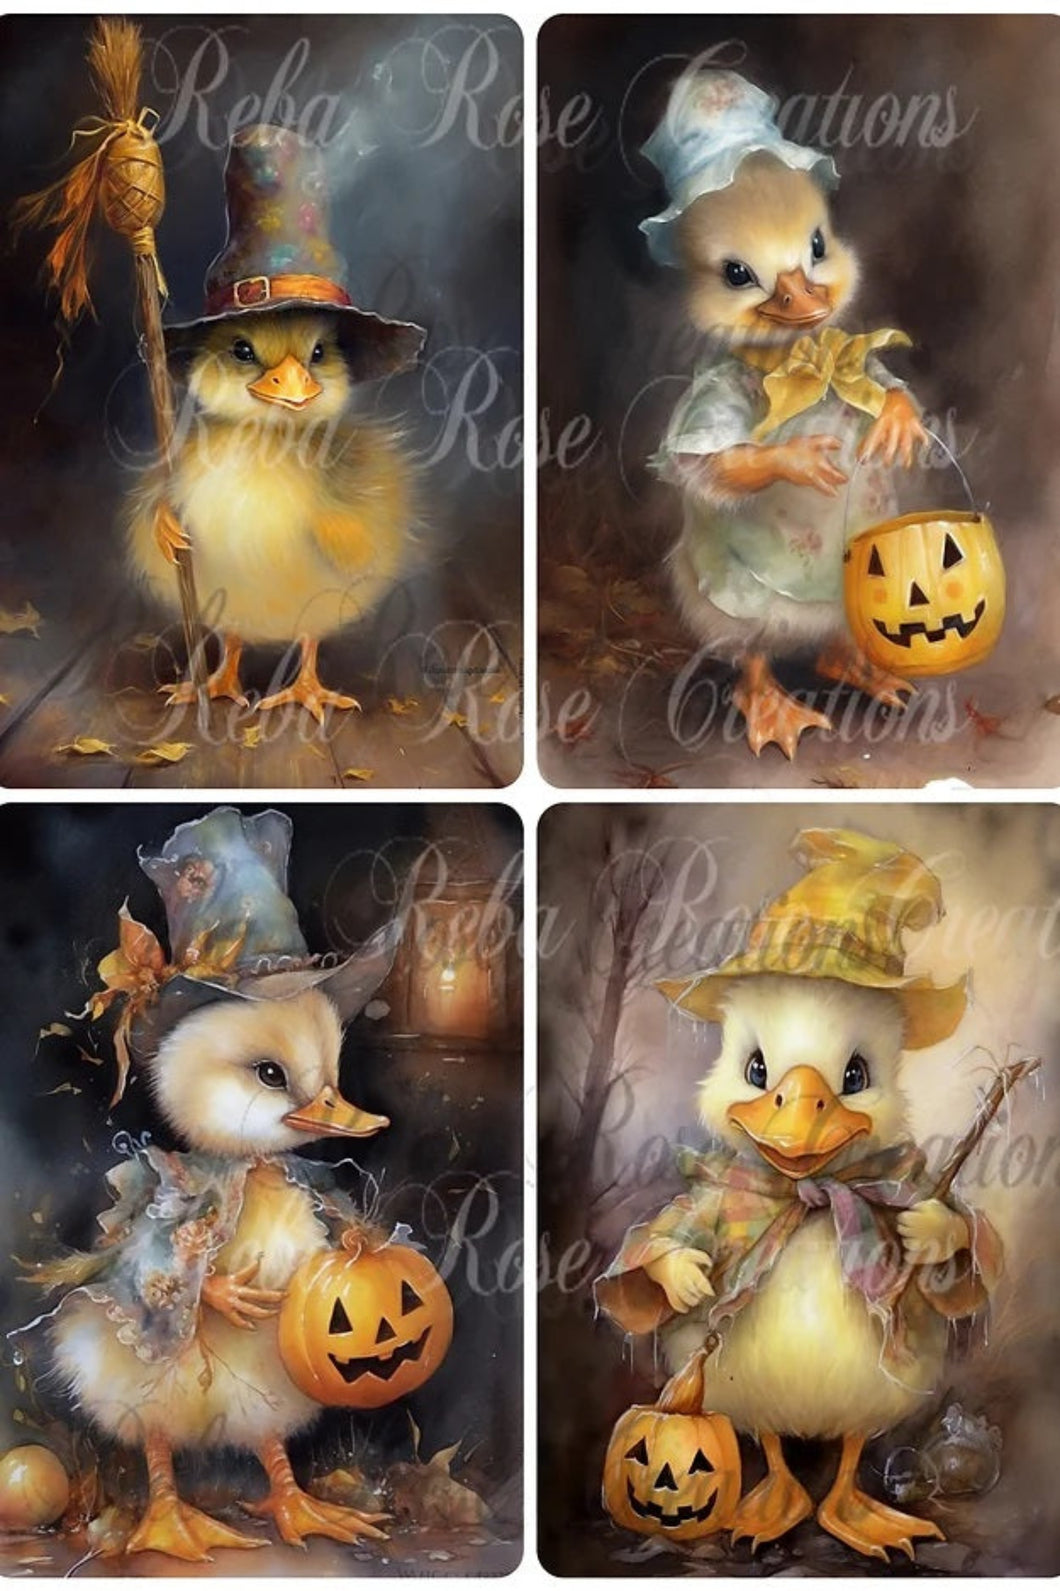 Trick or Treat Dewy Rice Paper by Reba Rose Creations